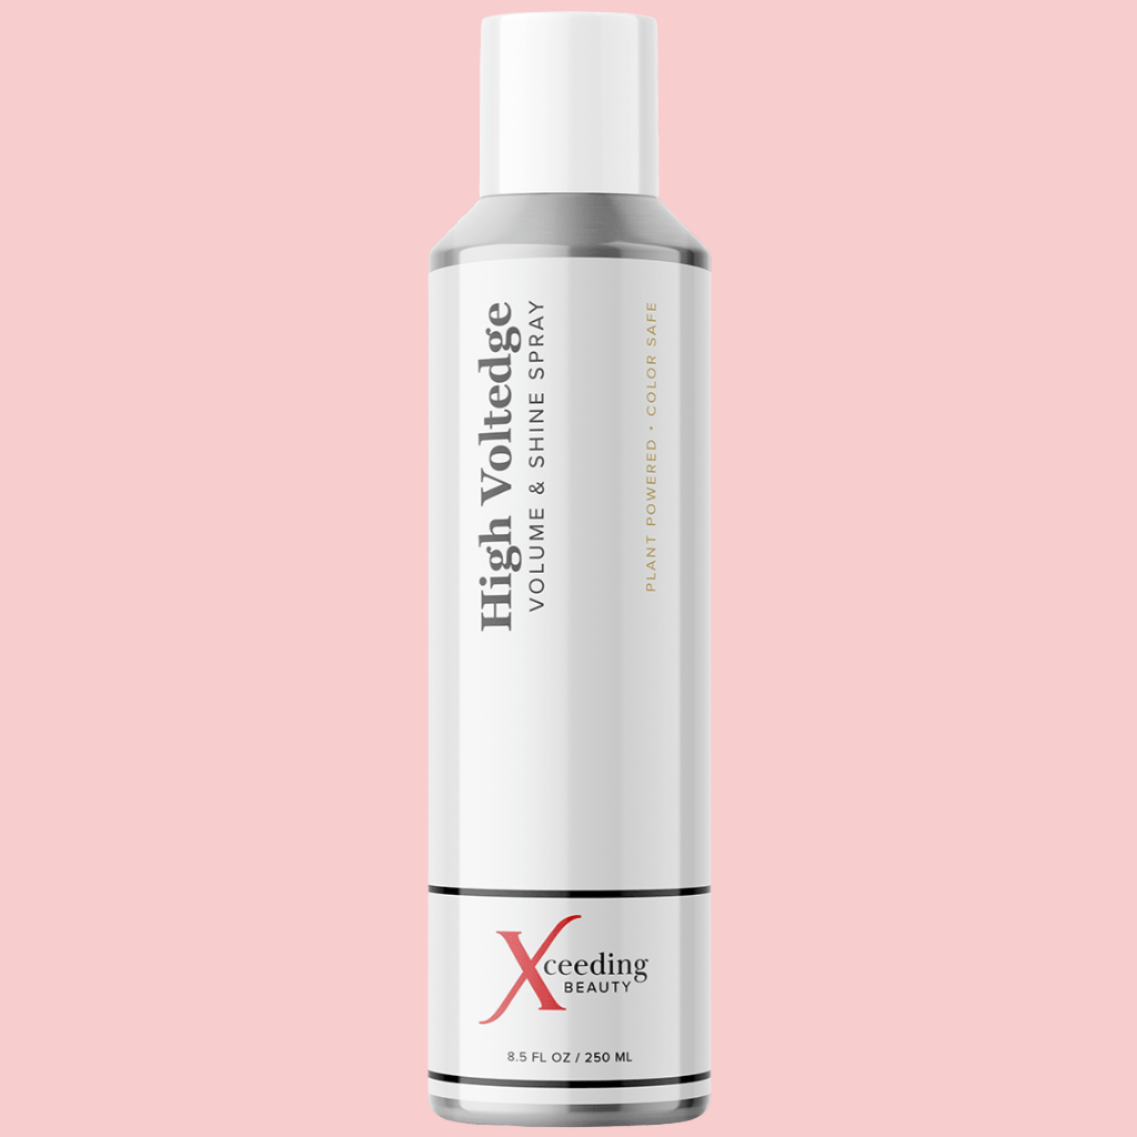 Elevate your hair's brilliance with Xceeding Beauty's High Voltedge Volume & Shine Spray. Achieve weightless volume and a lustrous finish effortlessly.